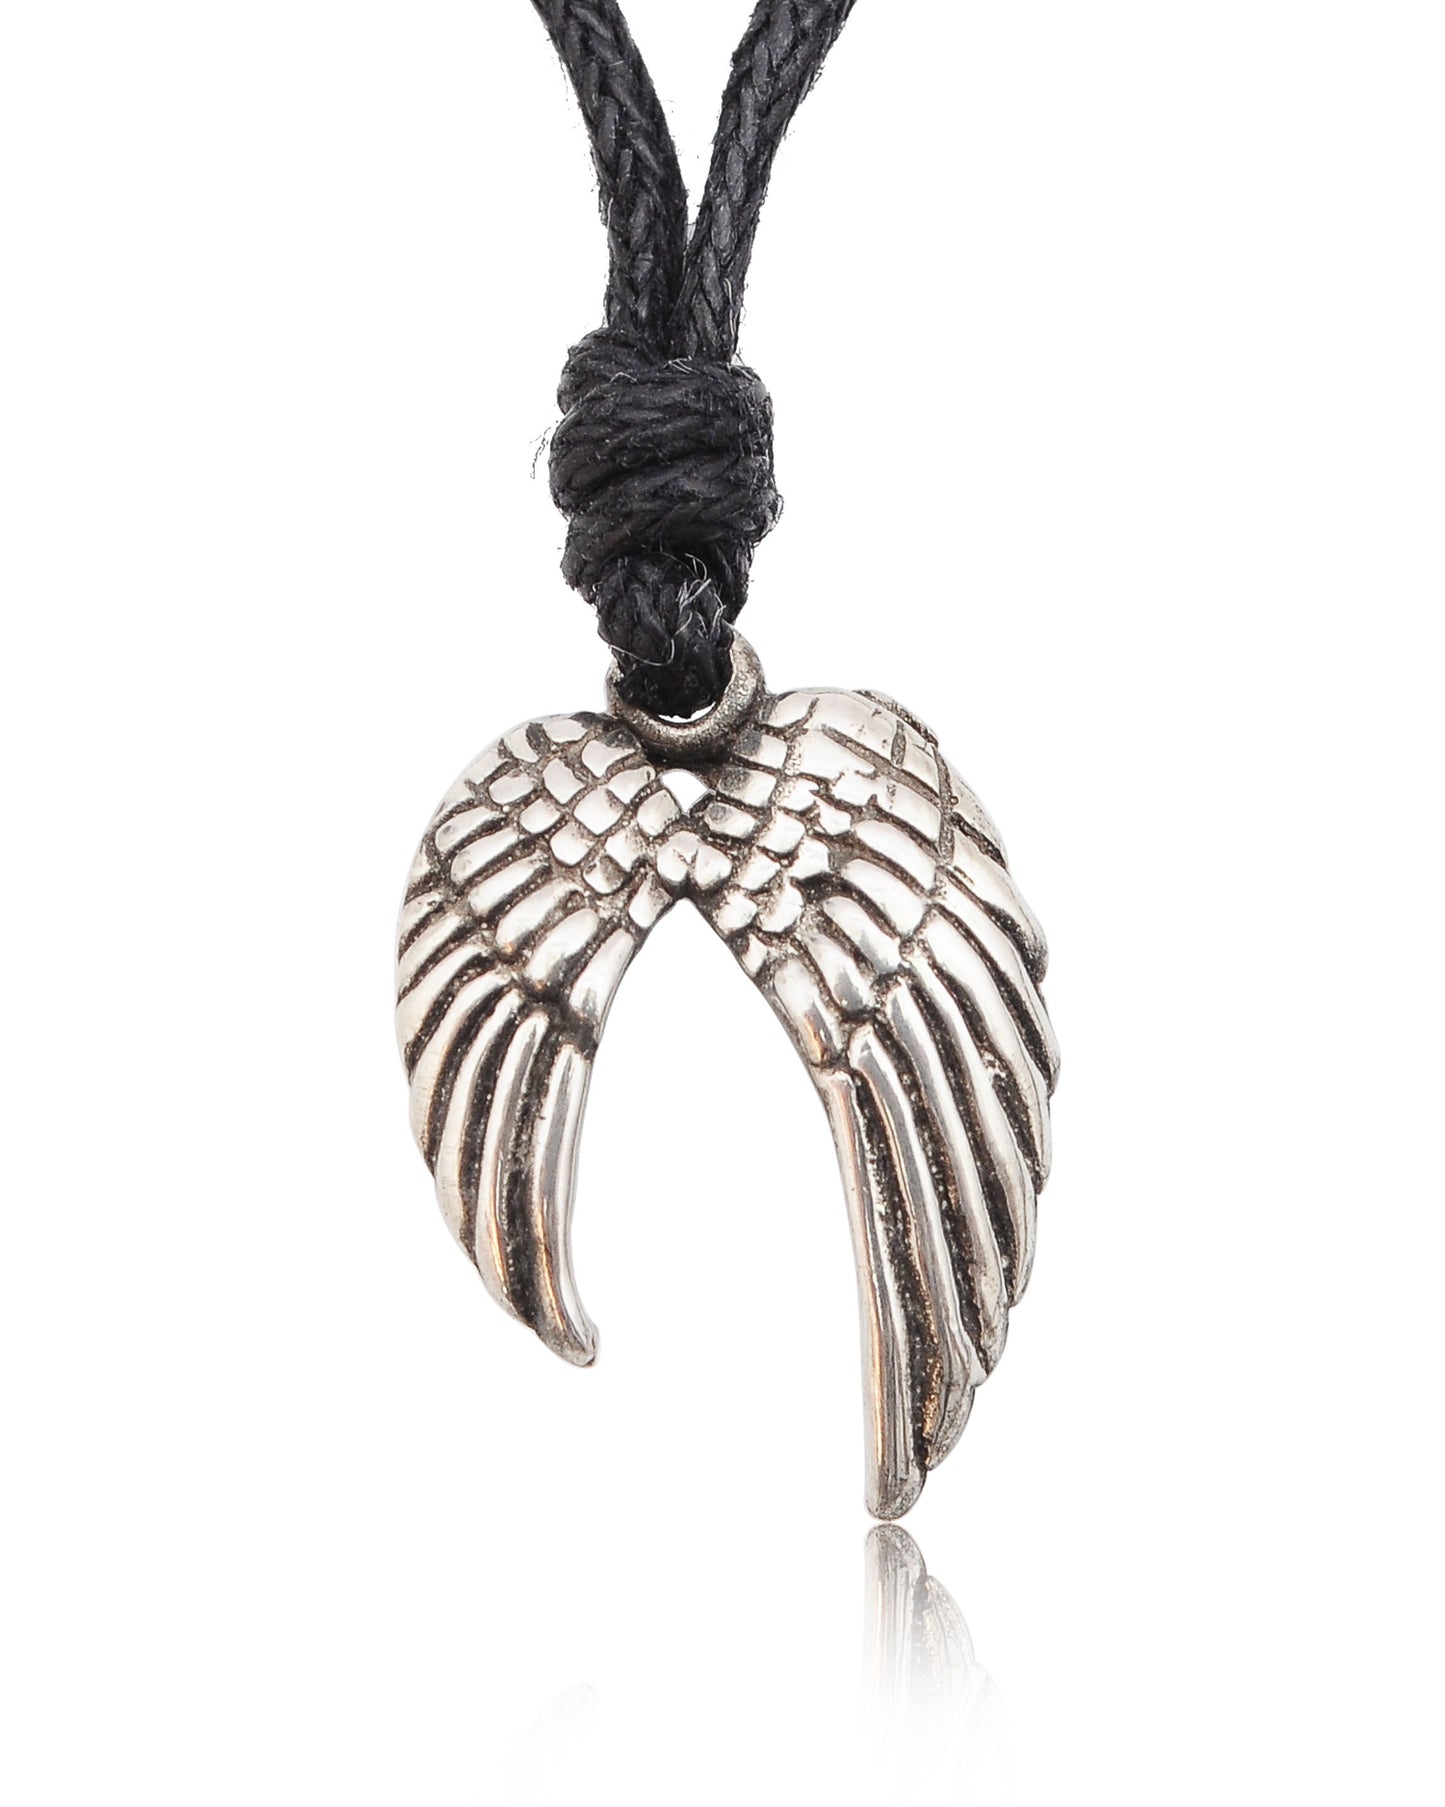 New Angel Wings Silver Pewter Charm Necklace Pendant Jewelry With Cotton Cord